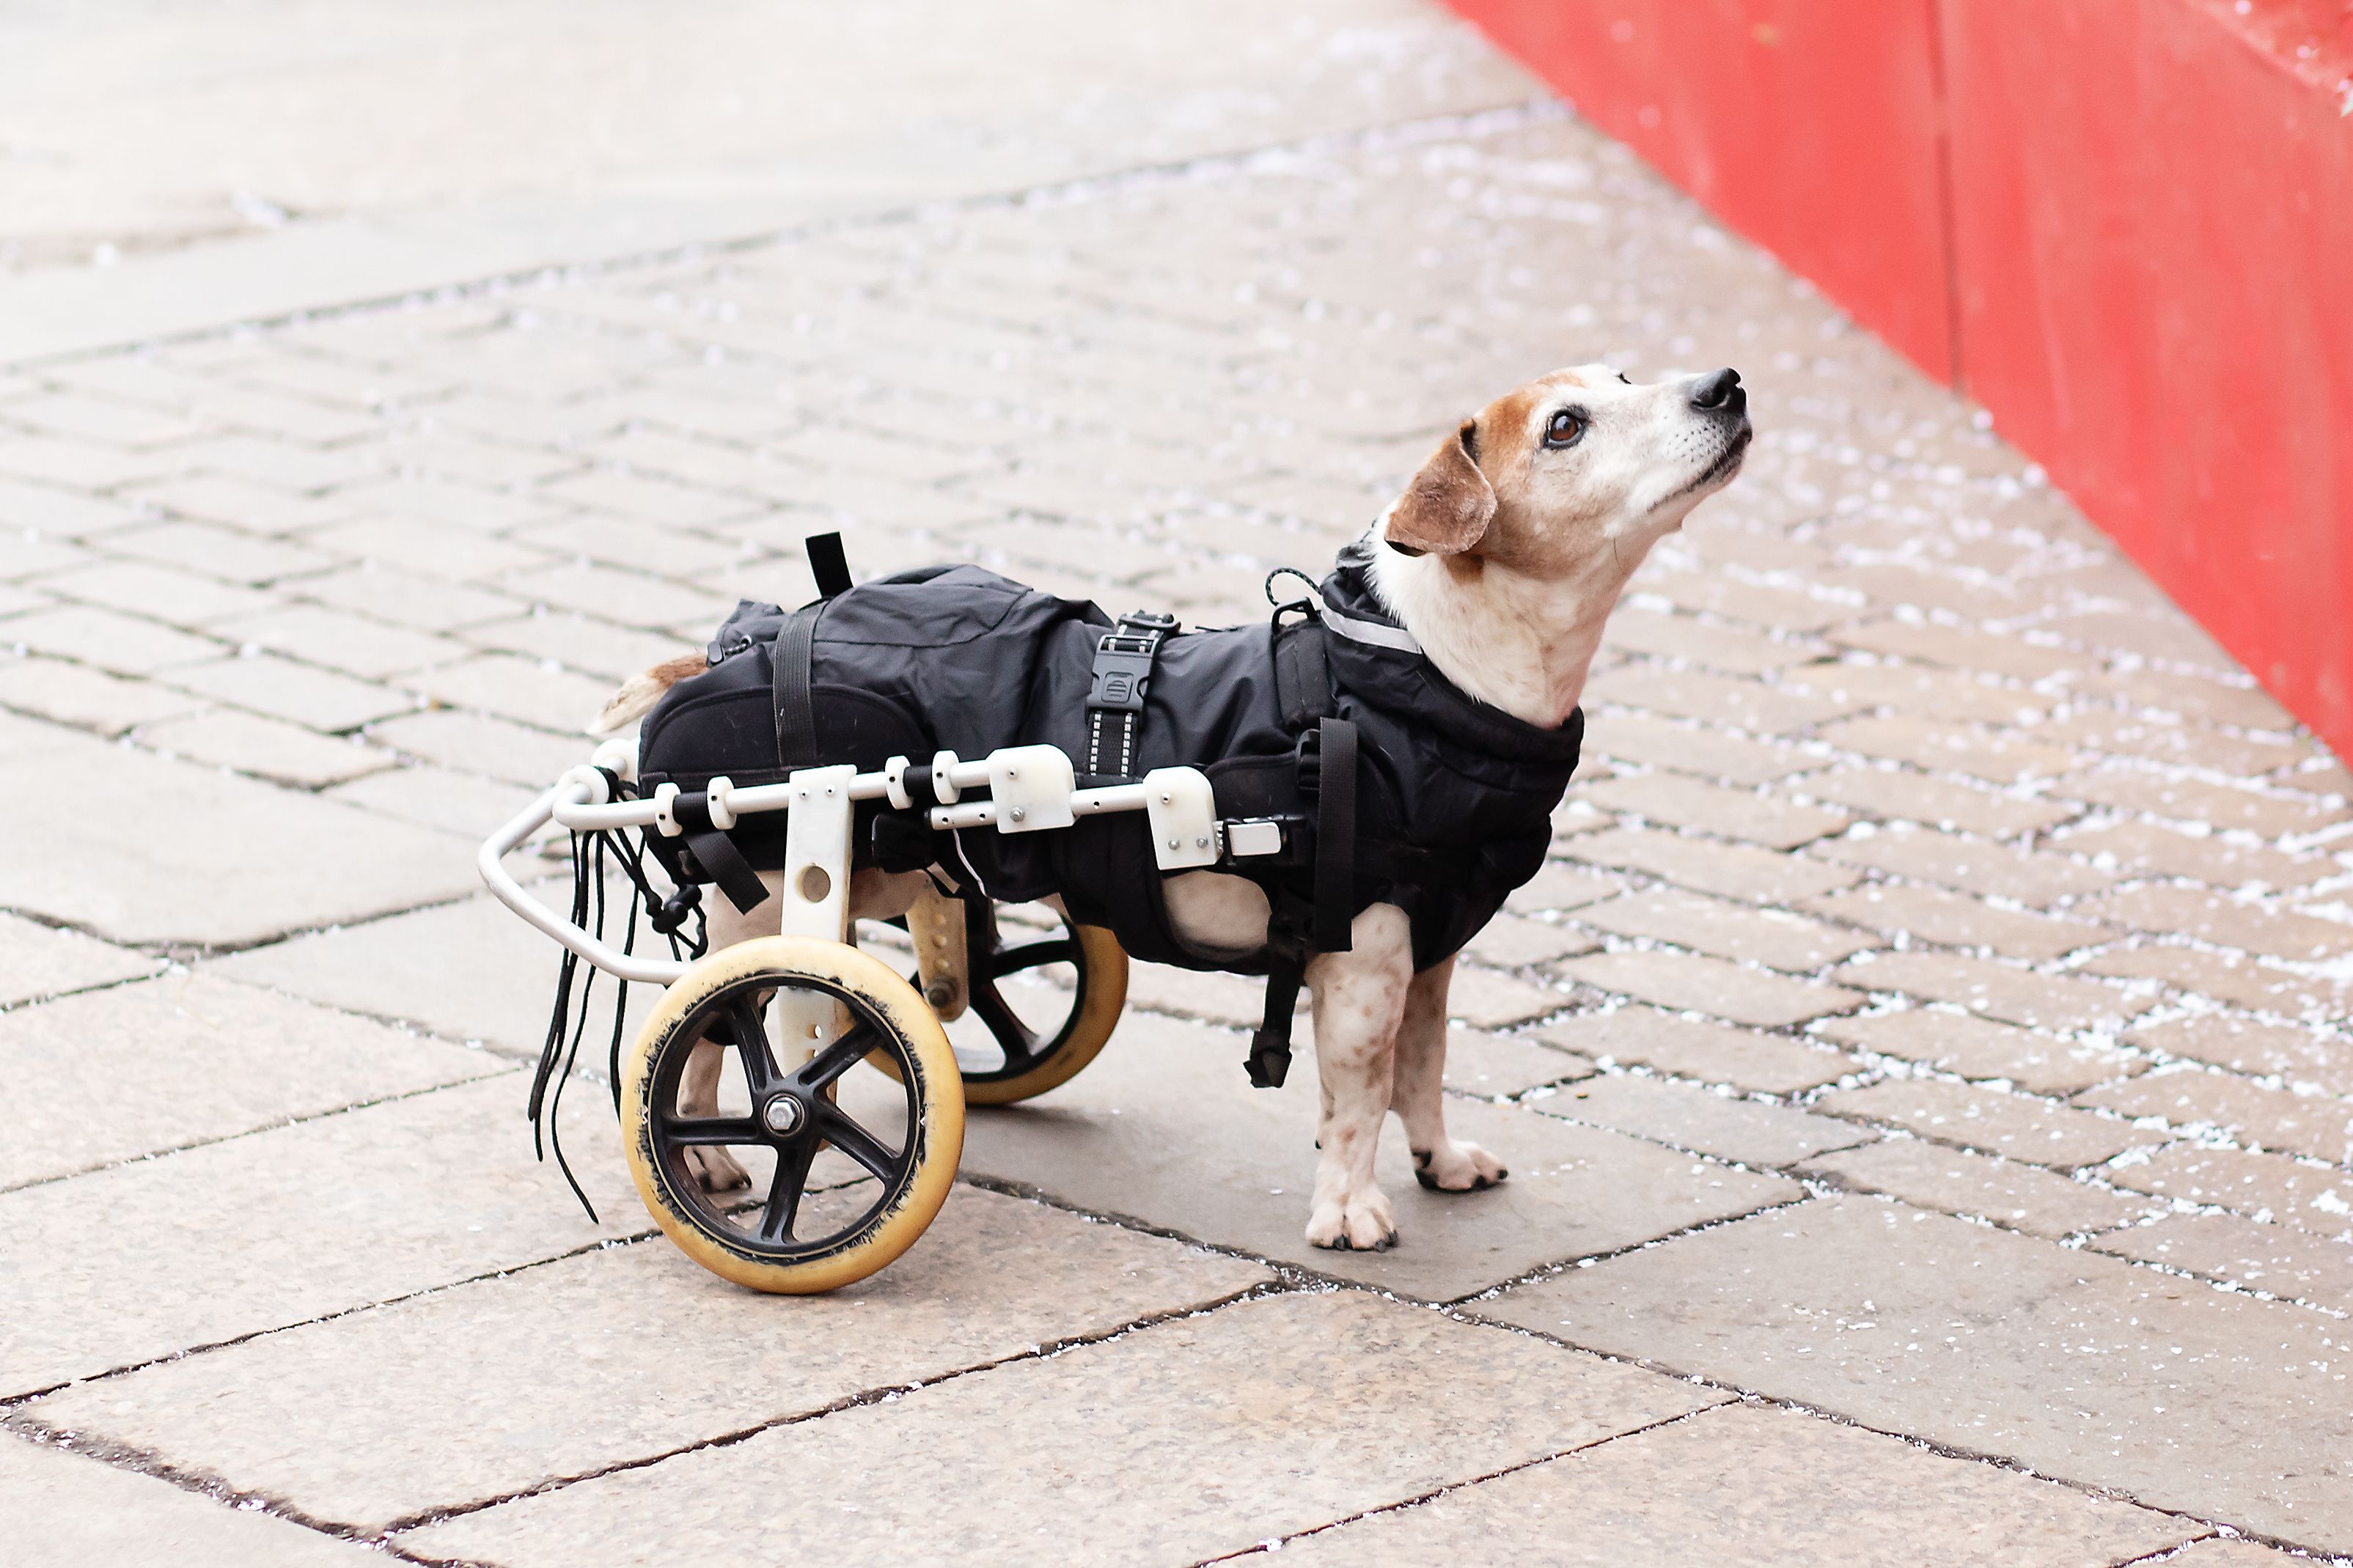 Caring for disabled pets: balancing drugs and compassion